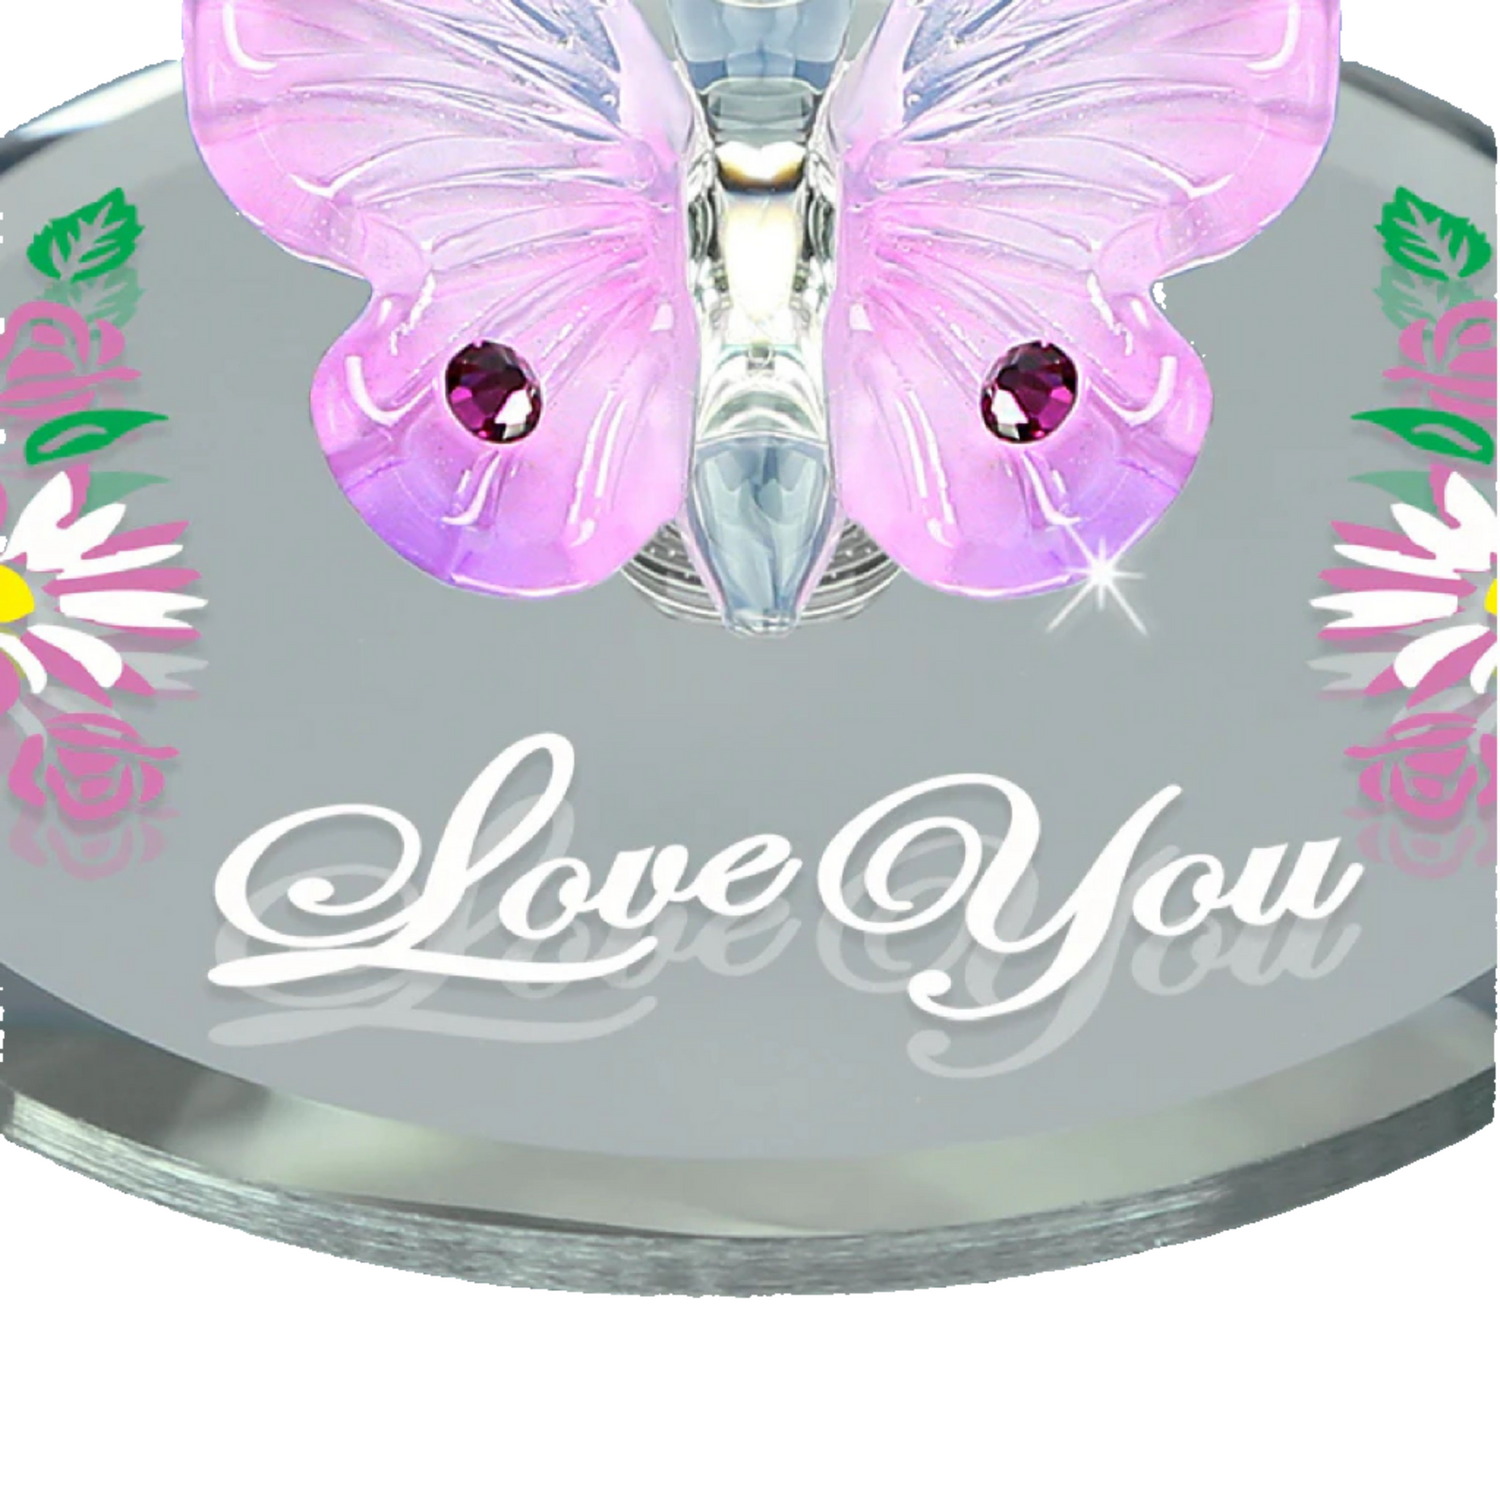 Glass Baron Butterfly "Love You" Figure